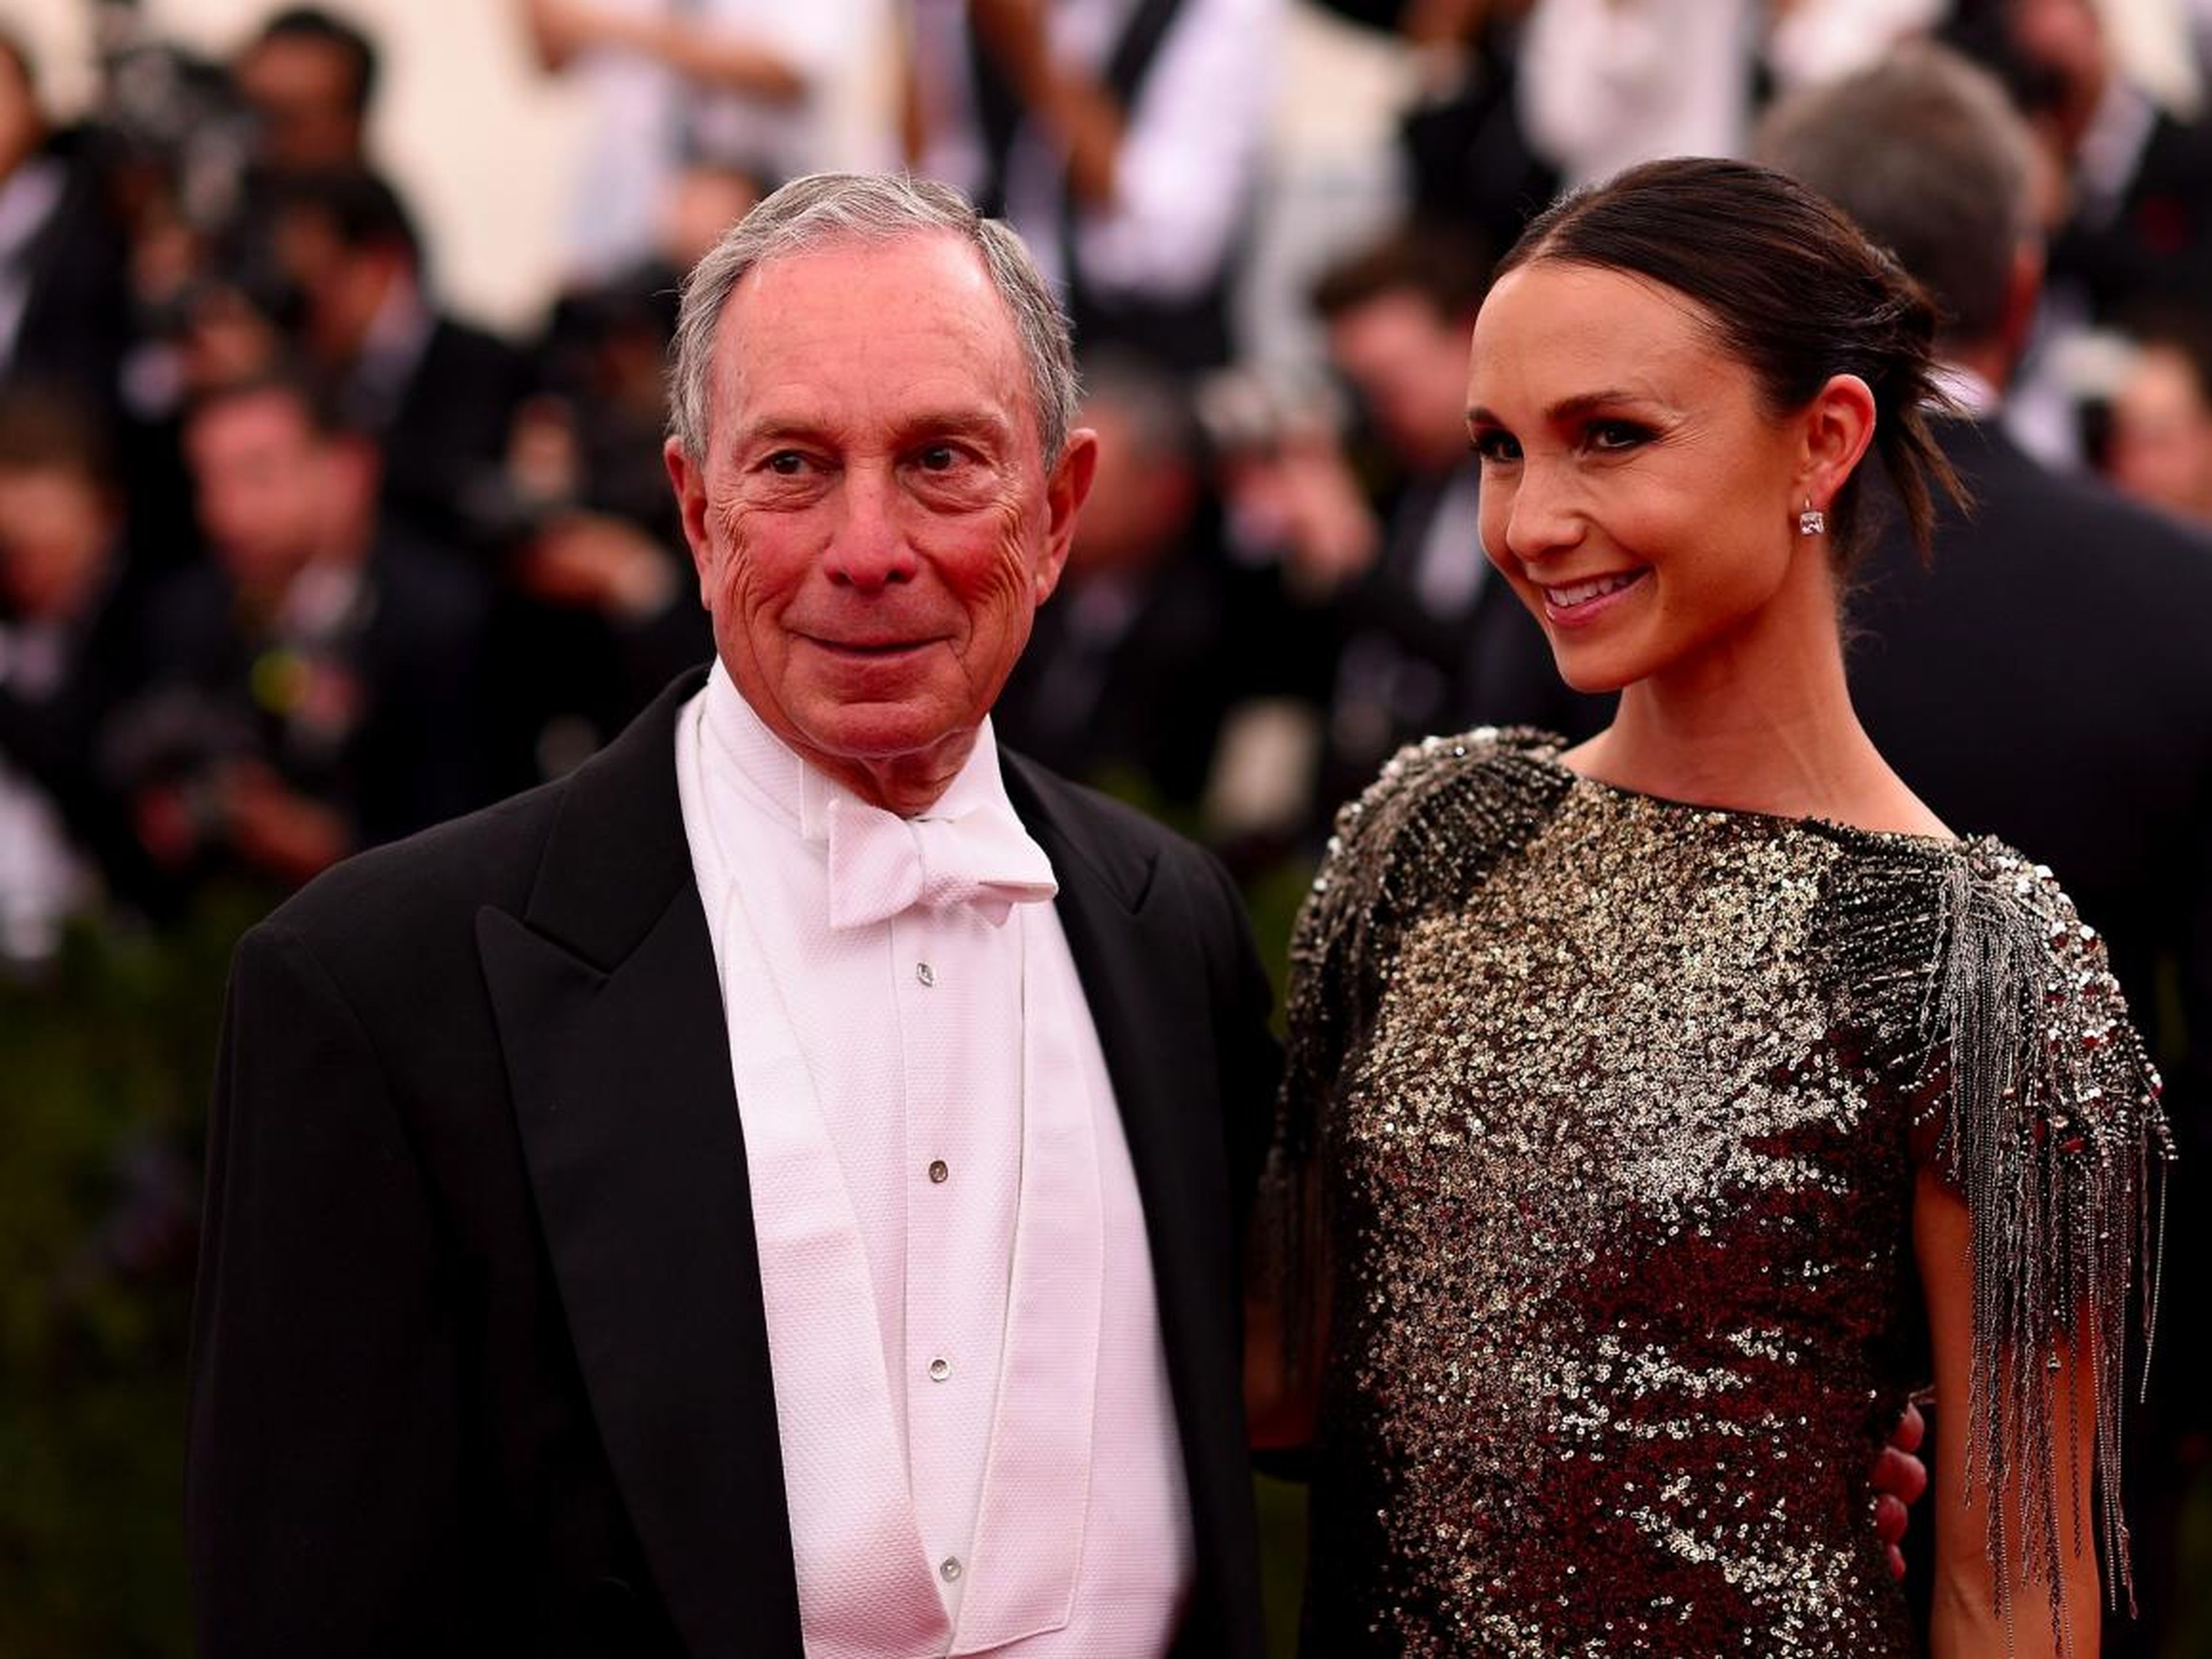 Michael Bloomberg has two daughters, 36 and 40 years old, with his former wife, Susan Brown.